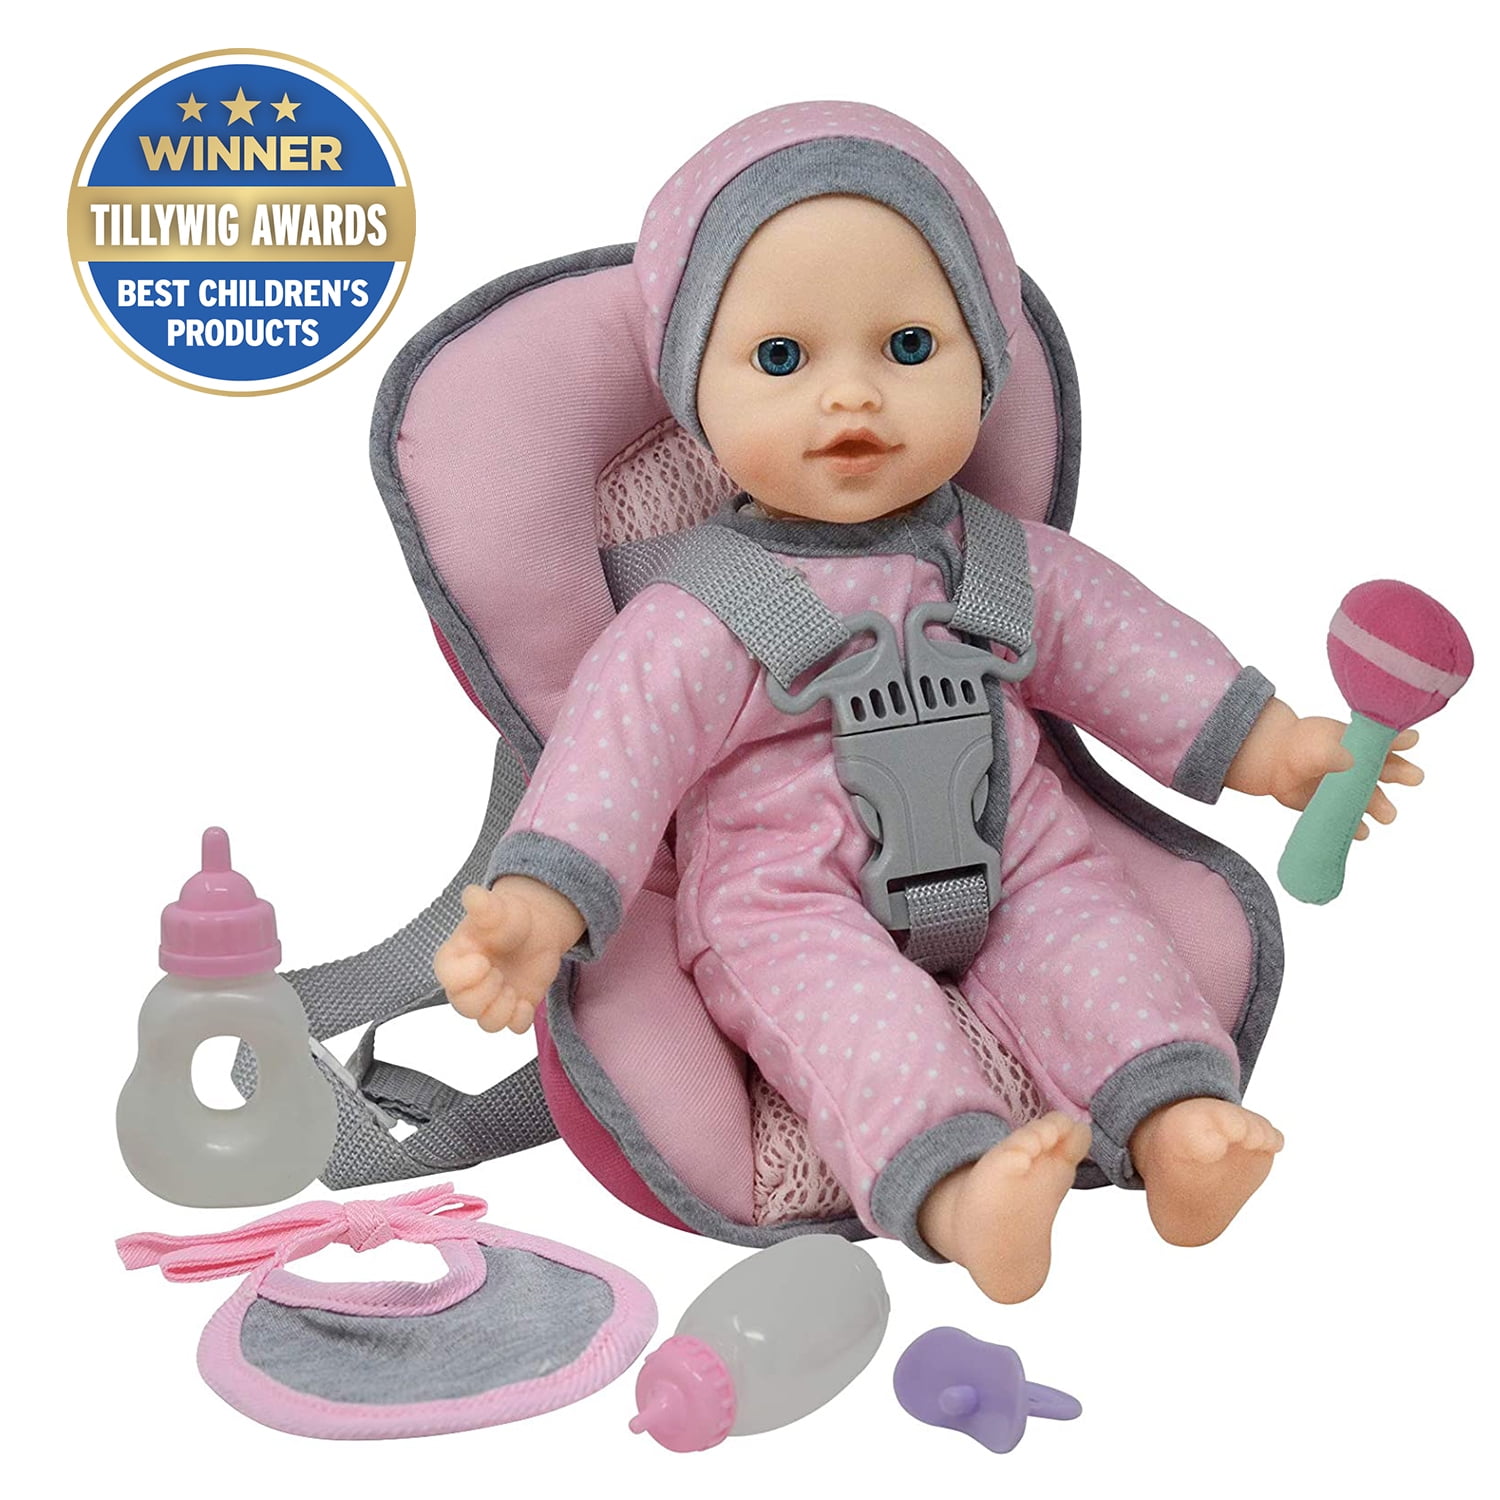 Casdon Baby Huggles Car Booster seat Role Play Doll Accessory Toy/Gift  BNIB 